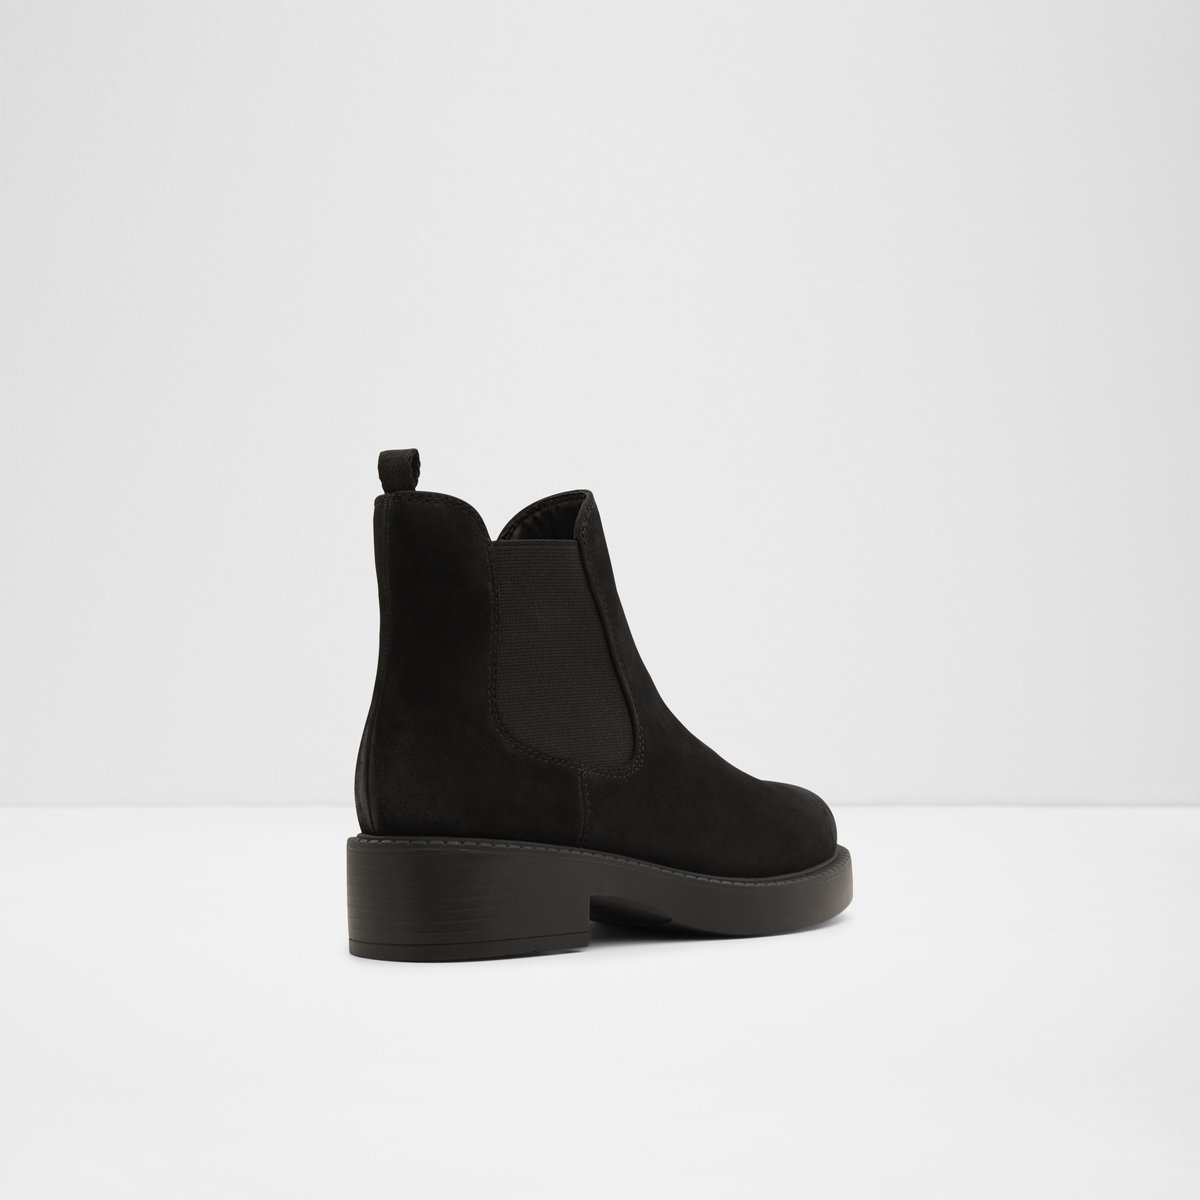 May Other Black Women's Chelsea boots | ALDO Canada